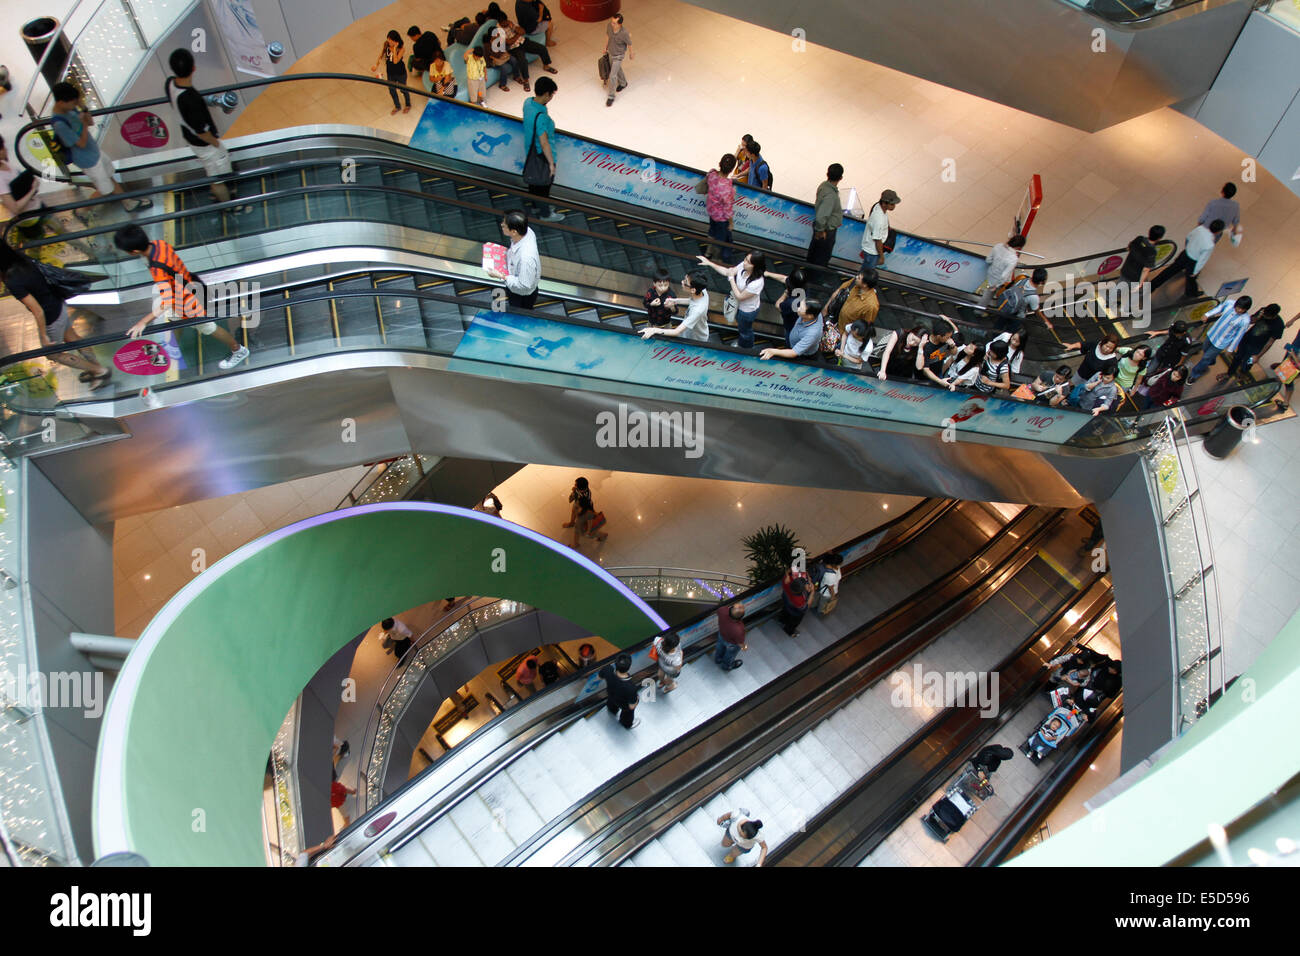 Shoppers on escalators in department store in Singapore Stock Photo - Alamy